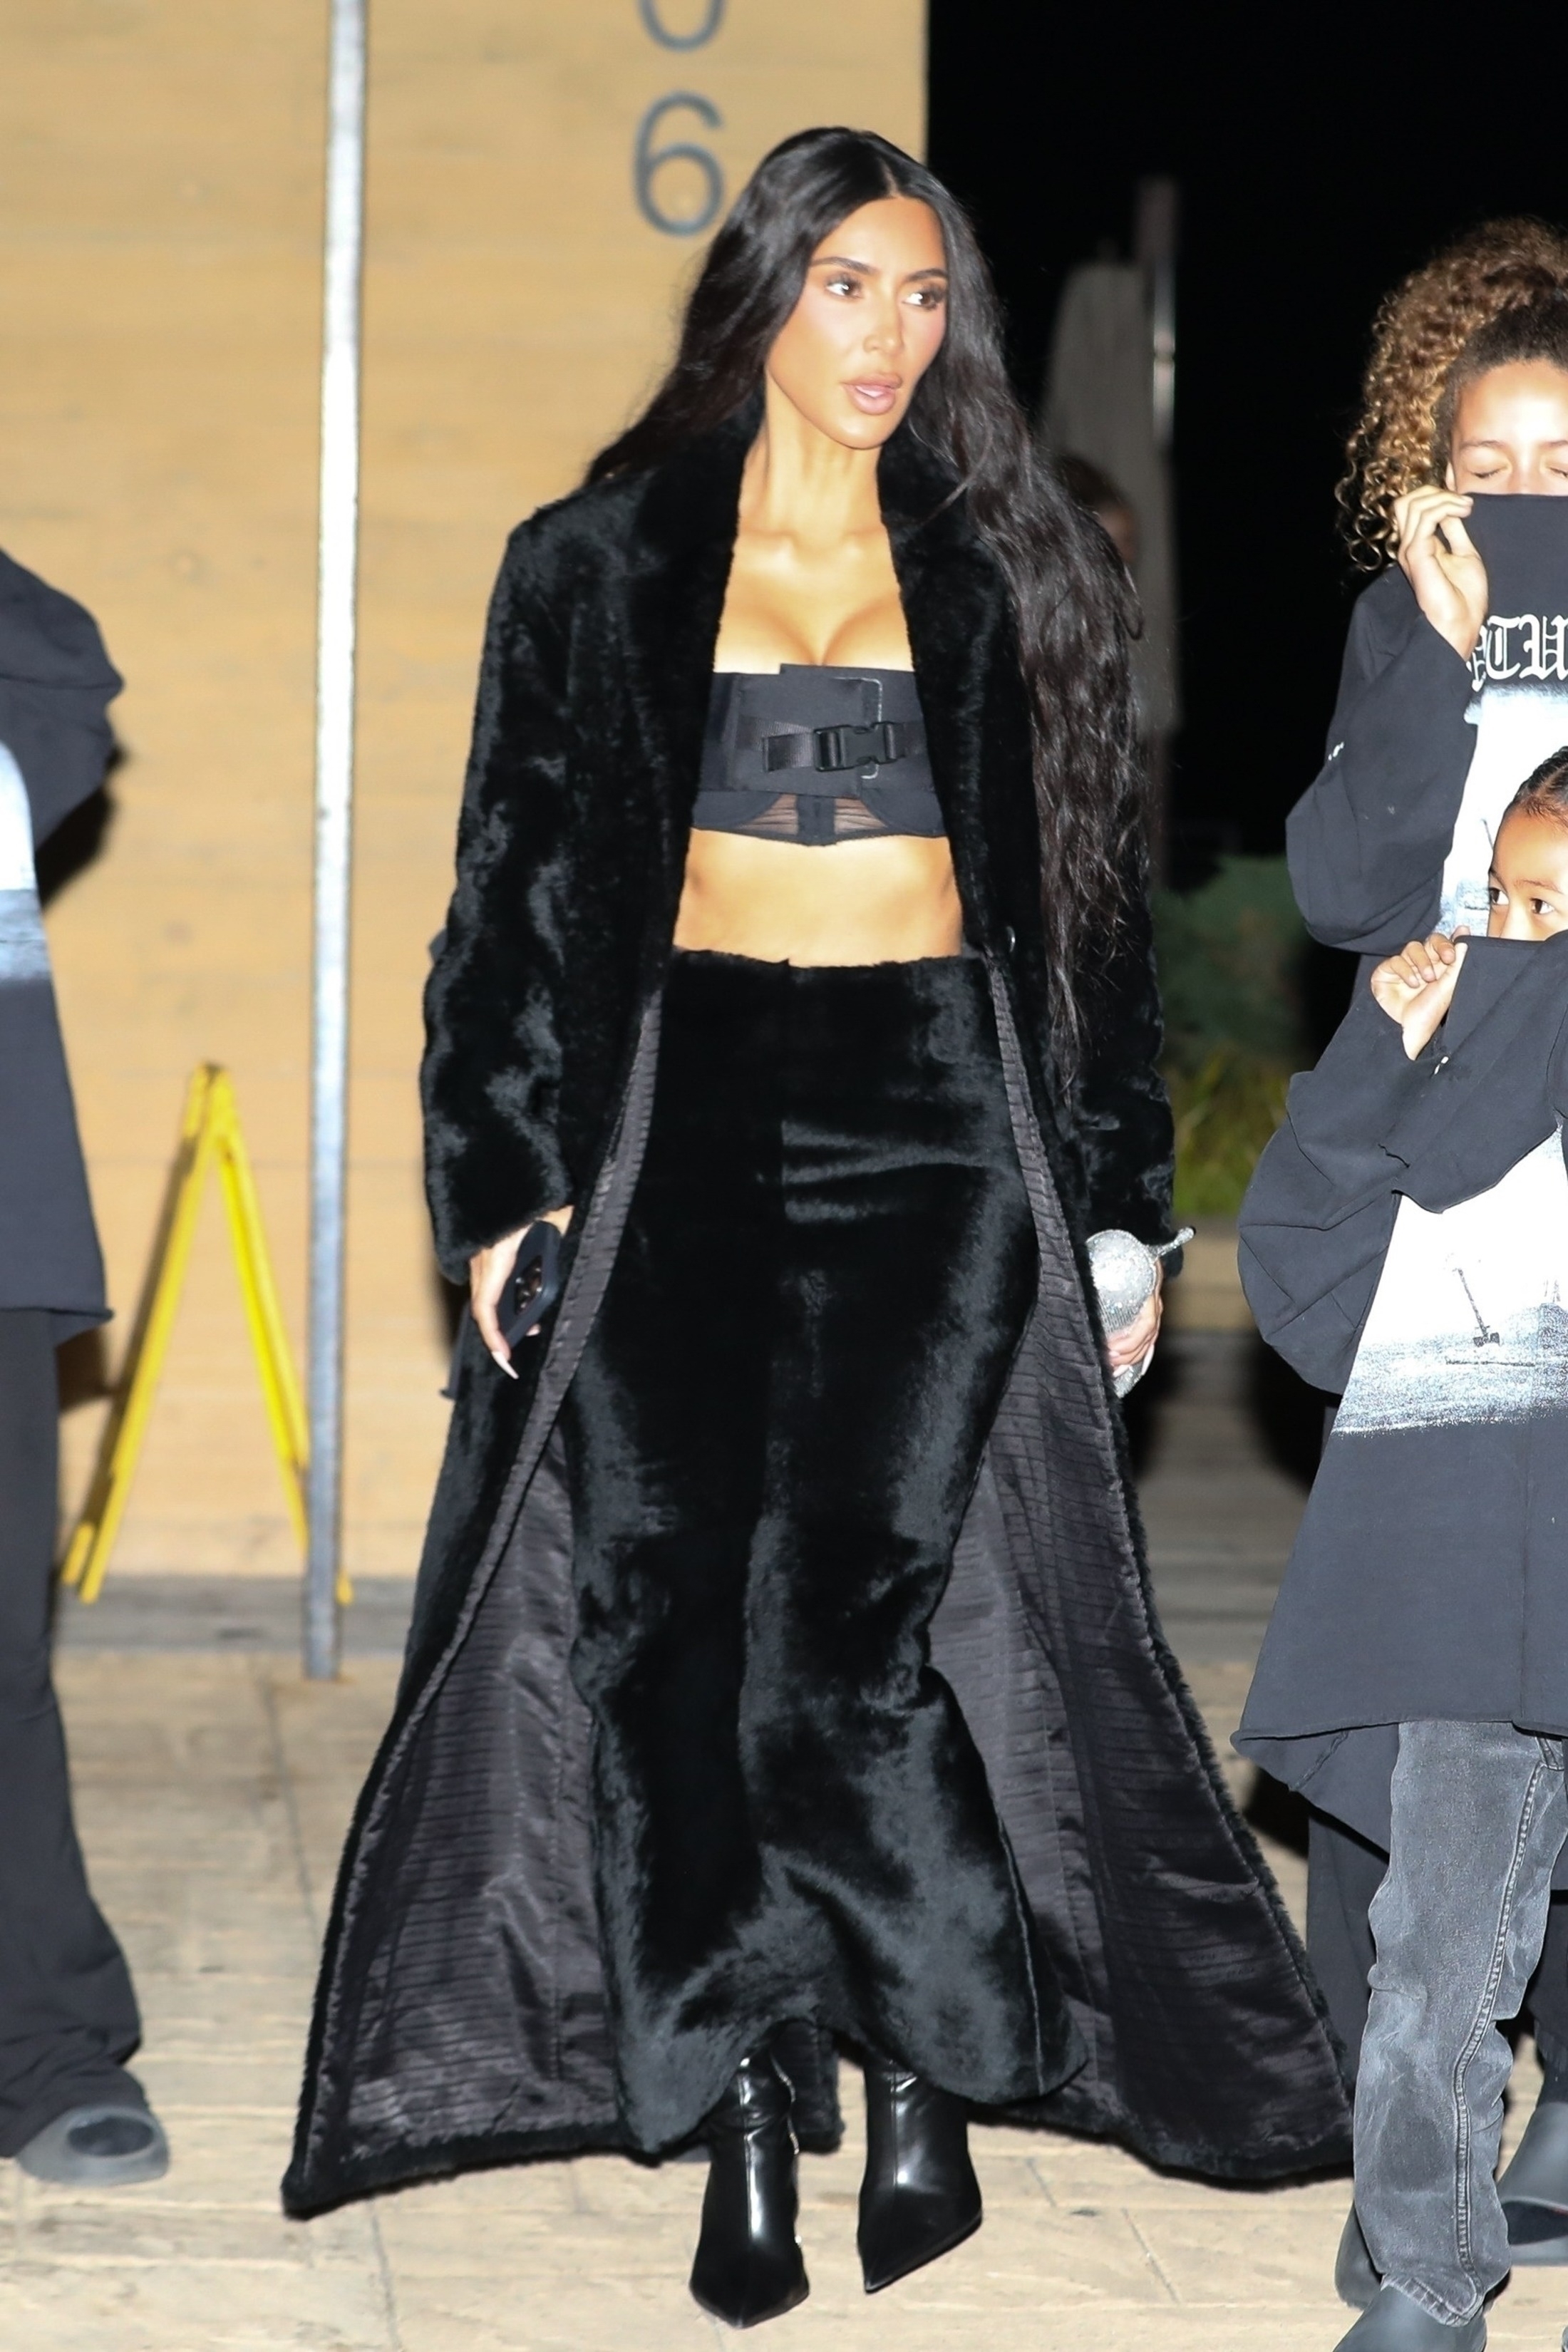 Kim was accused of copying Bianca in a jaw-dropping outfit during a recent family dinner at Nobu in Malibu, California